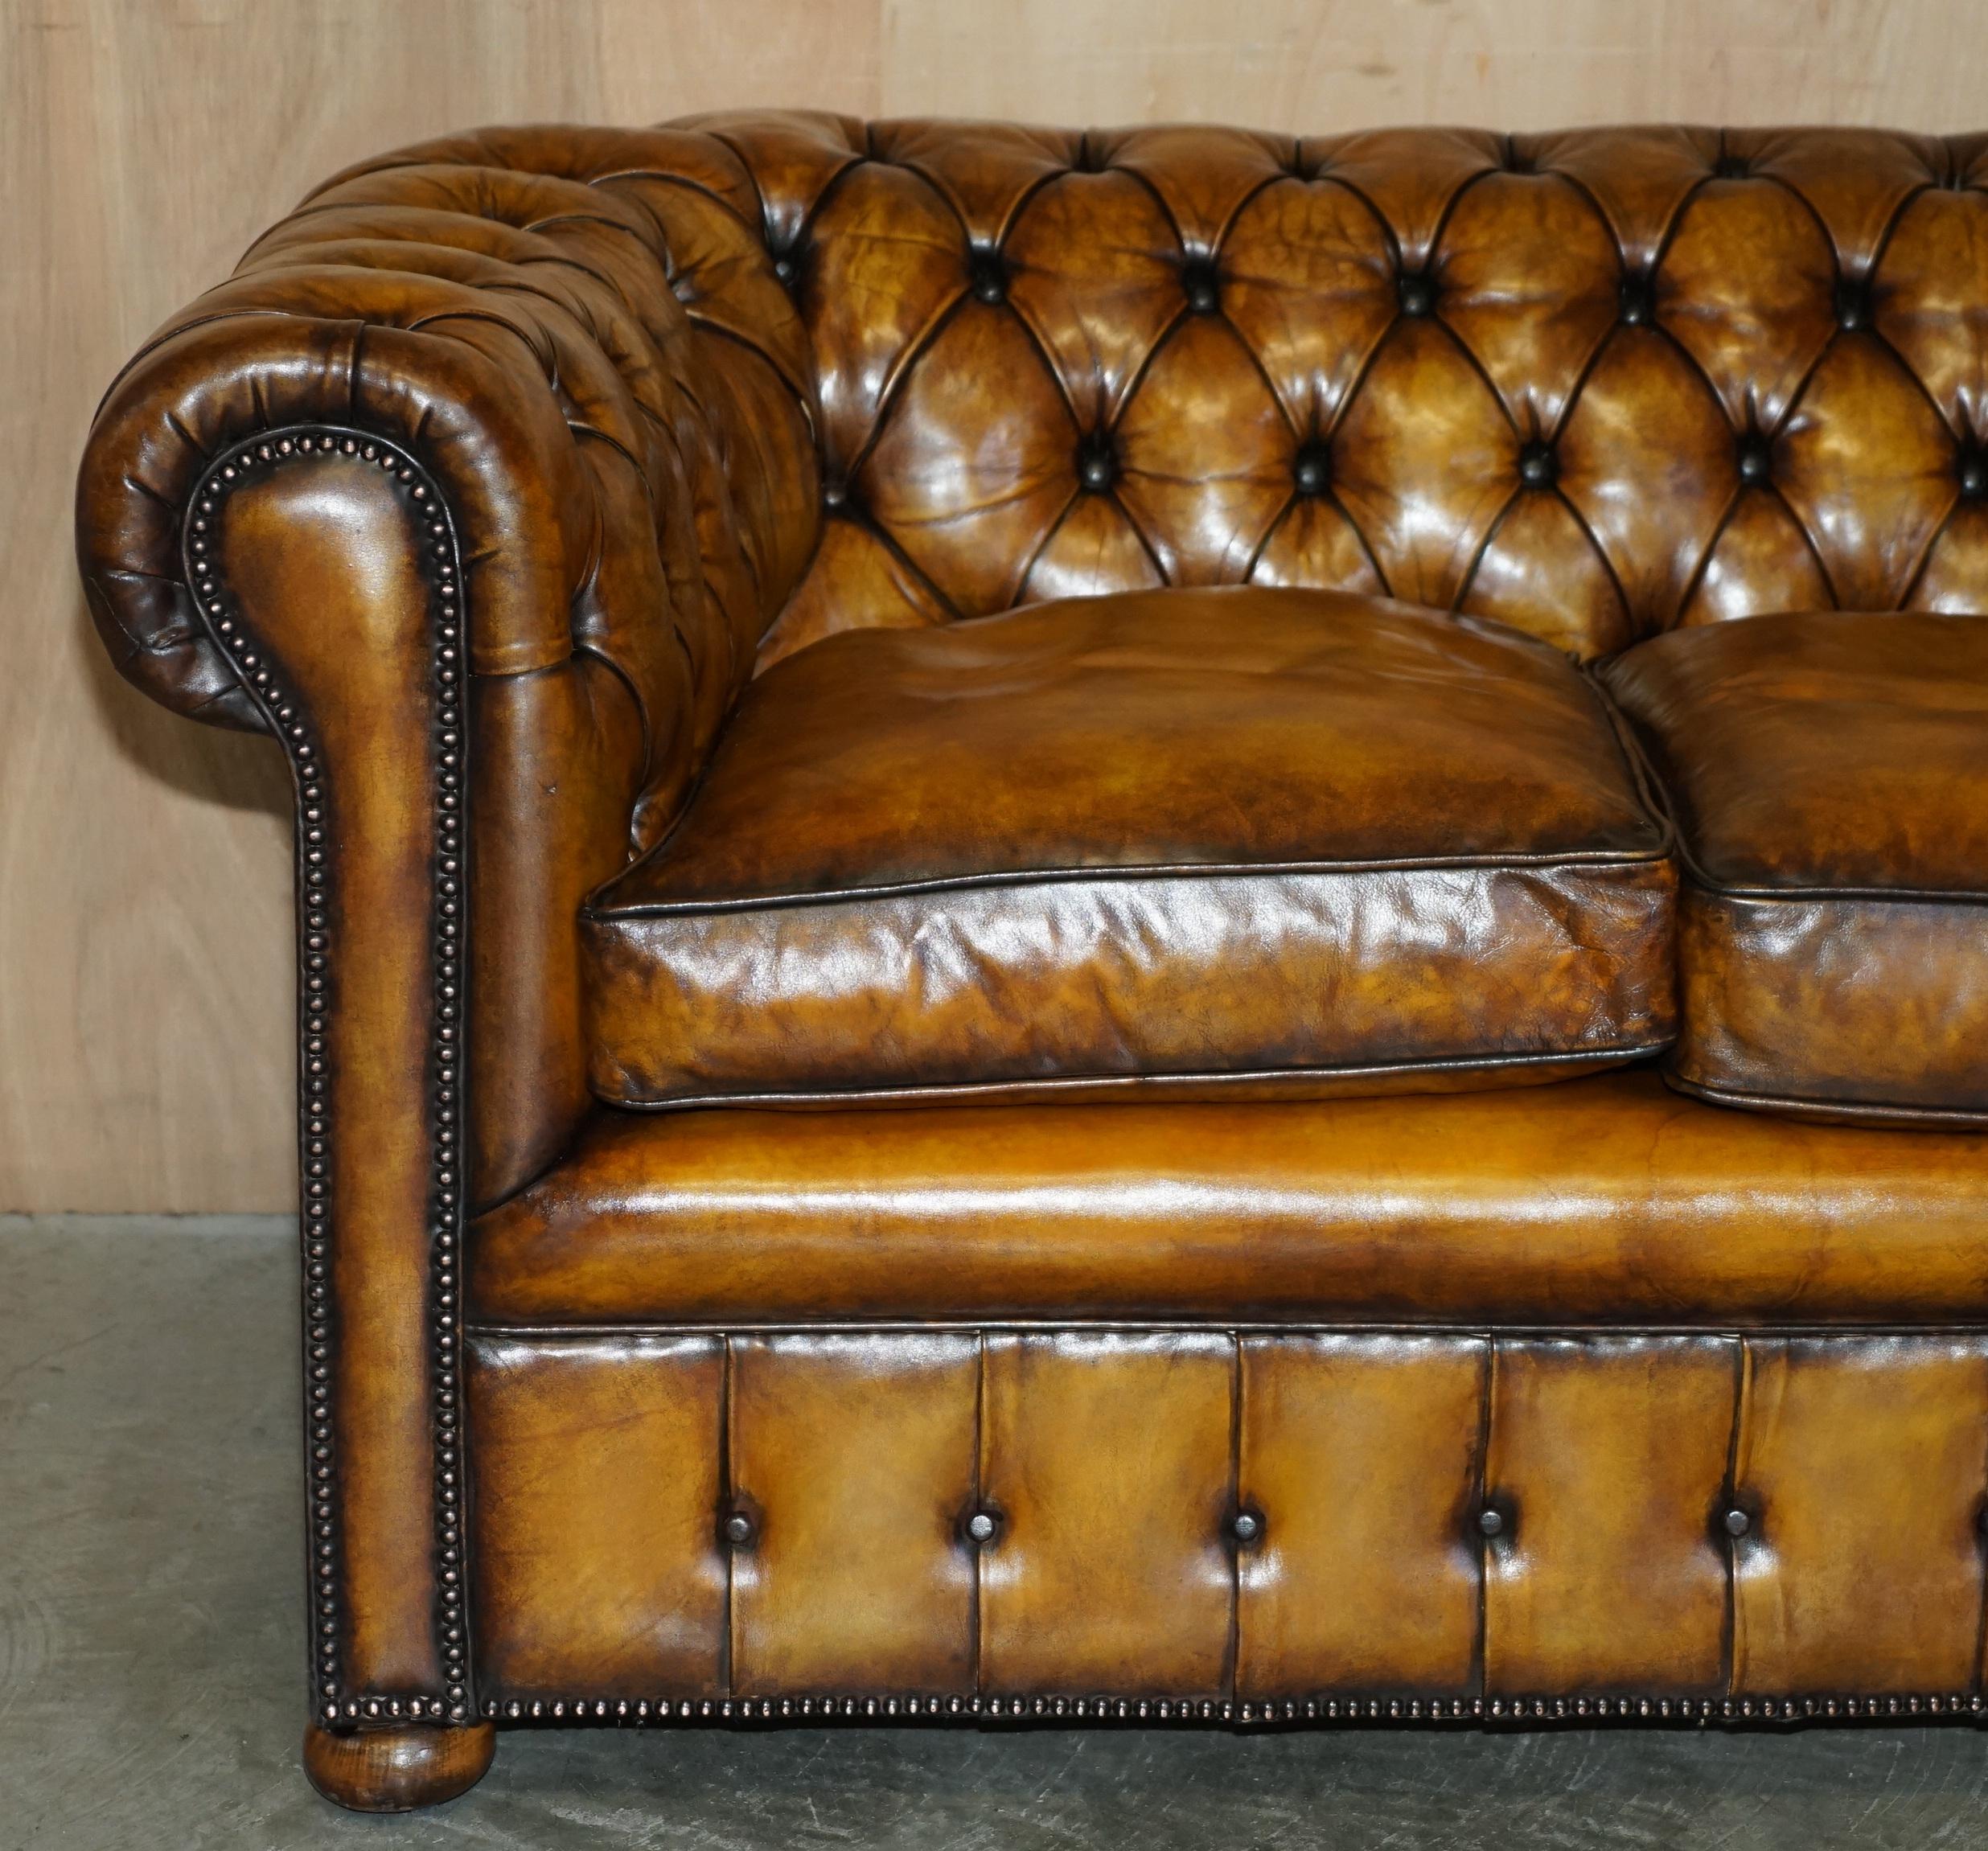 Art Deco SUPER RARE FULLY RESTORED ViNTAGE CIGAR BROWN LEATHER CHESTERFIELD SOFA PART SET For Sale